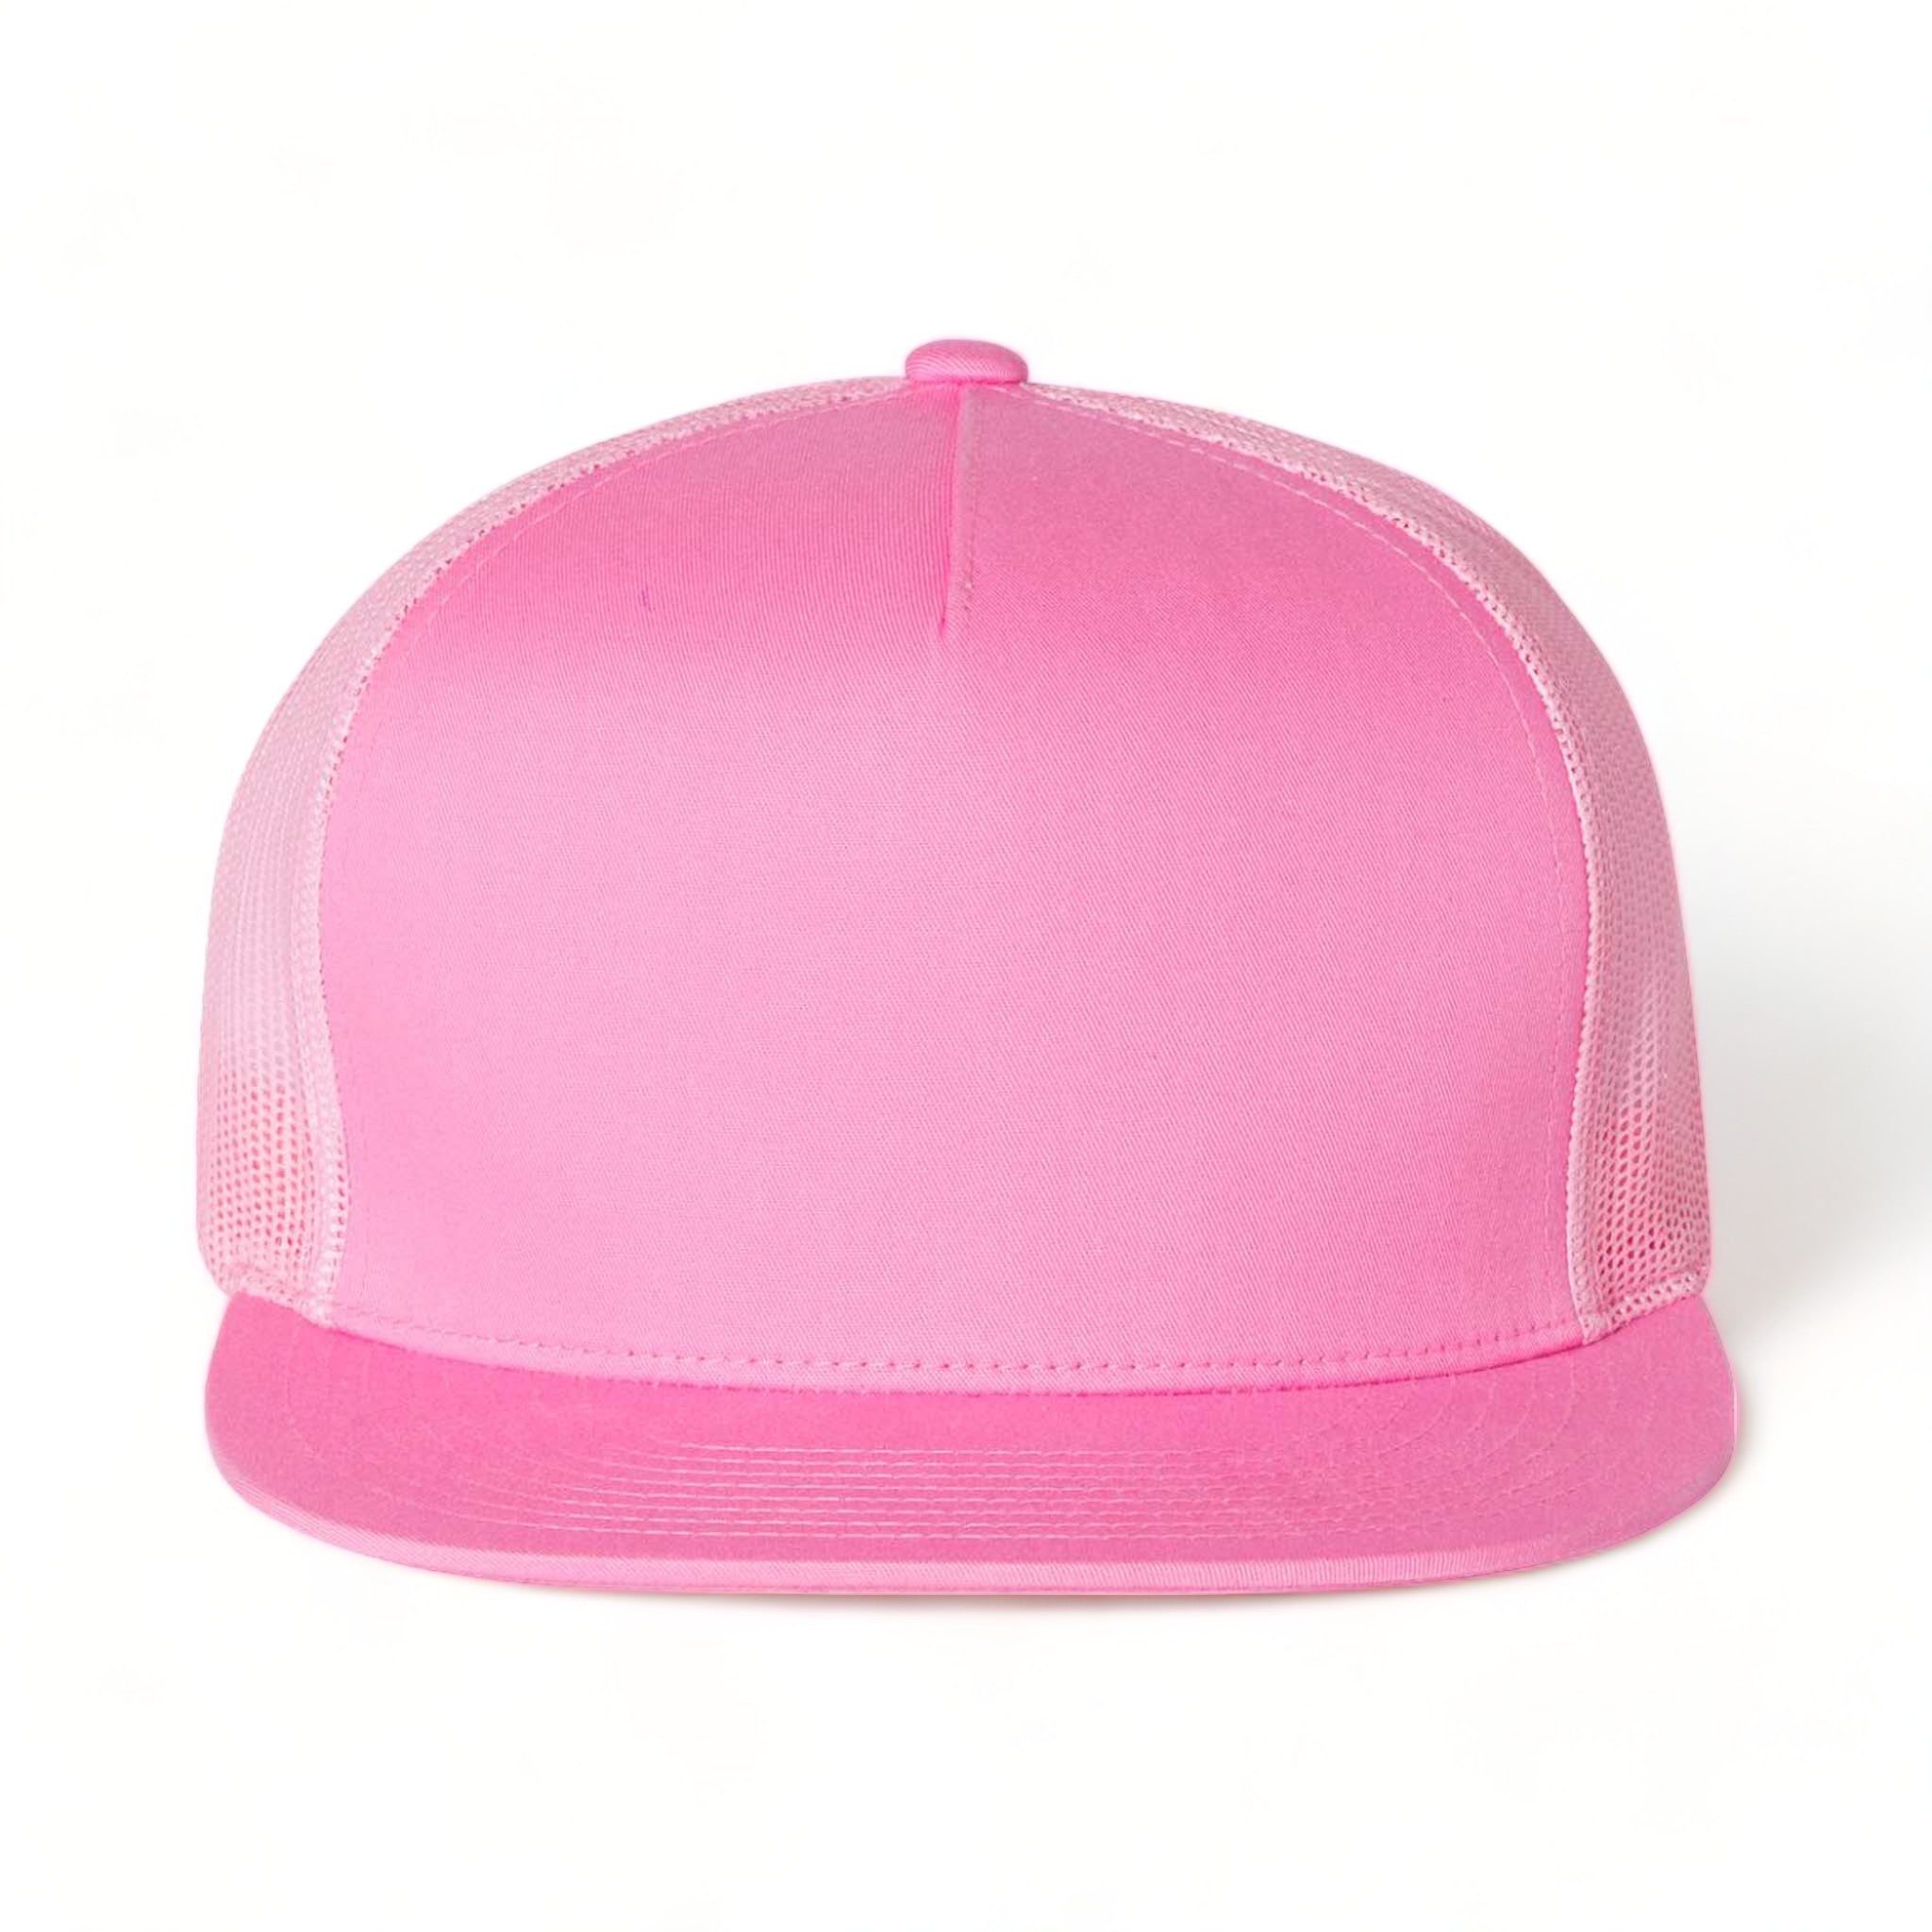 Front view of YP Classics 6006 custom hat in pink